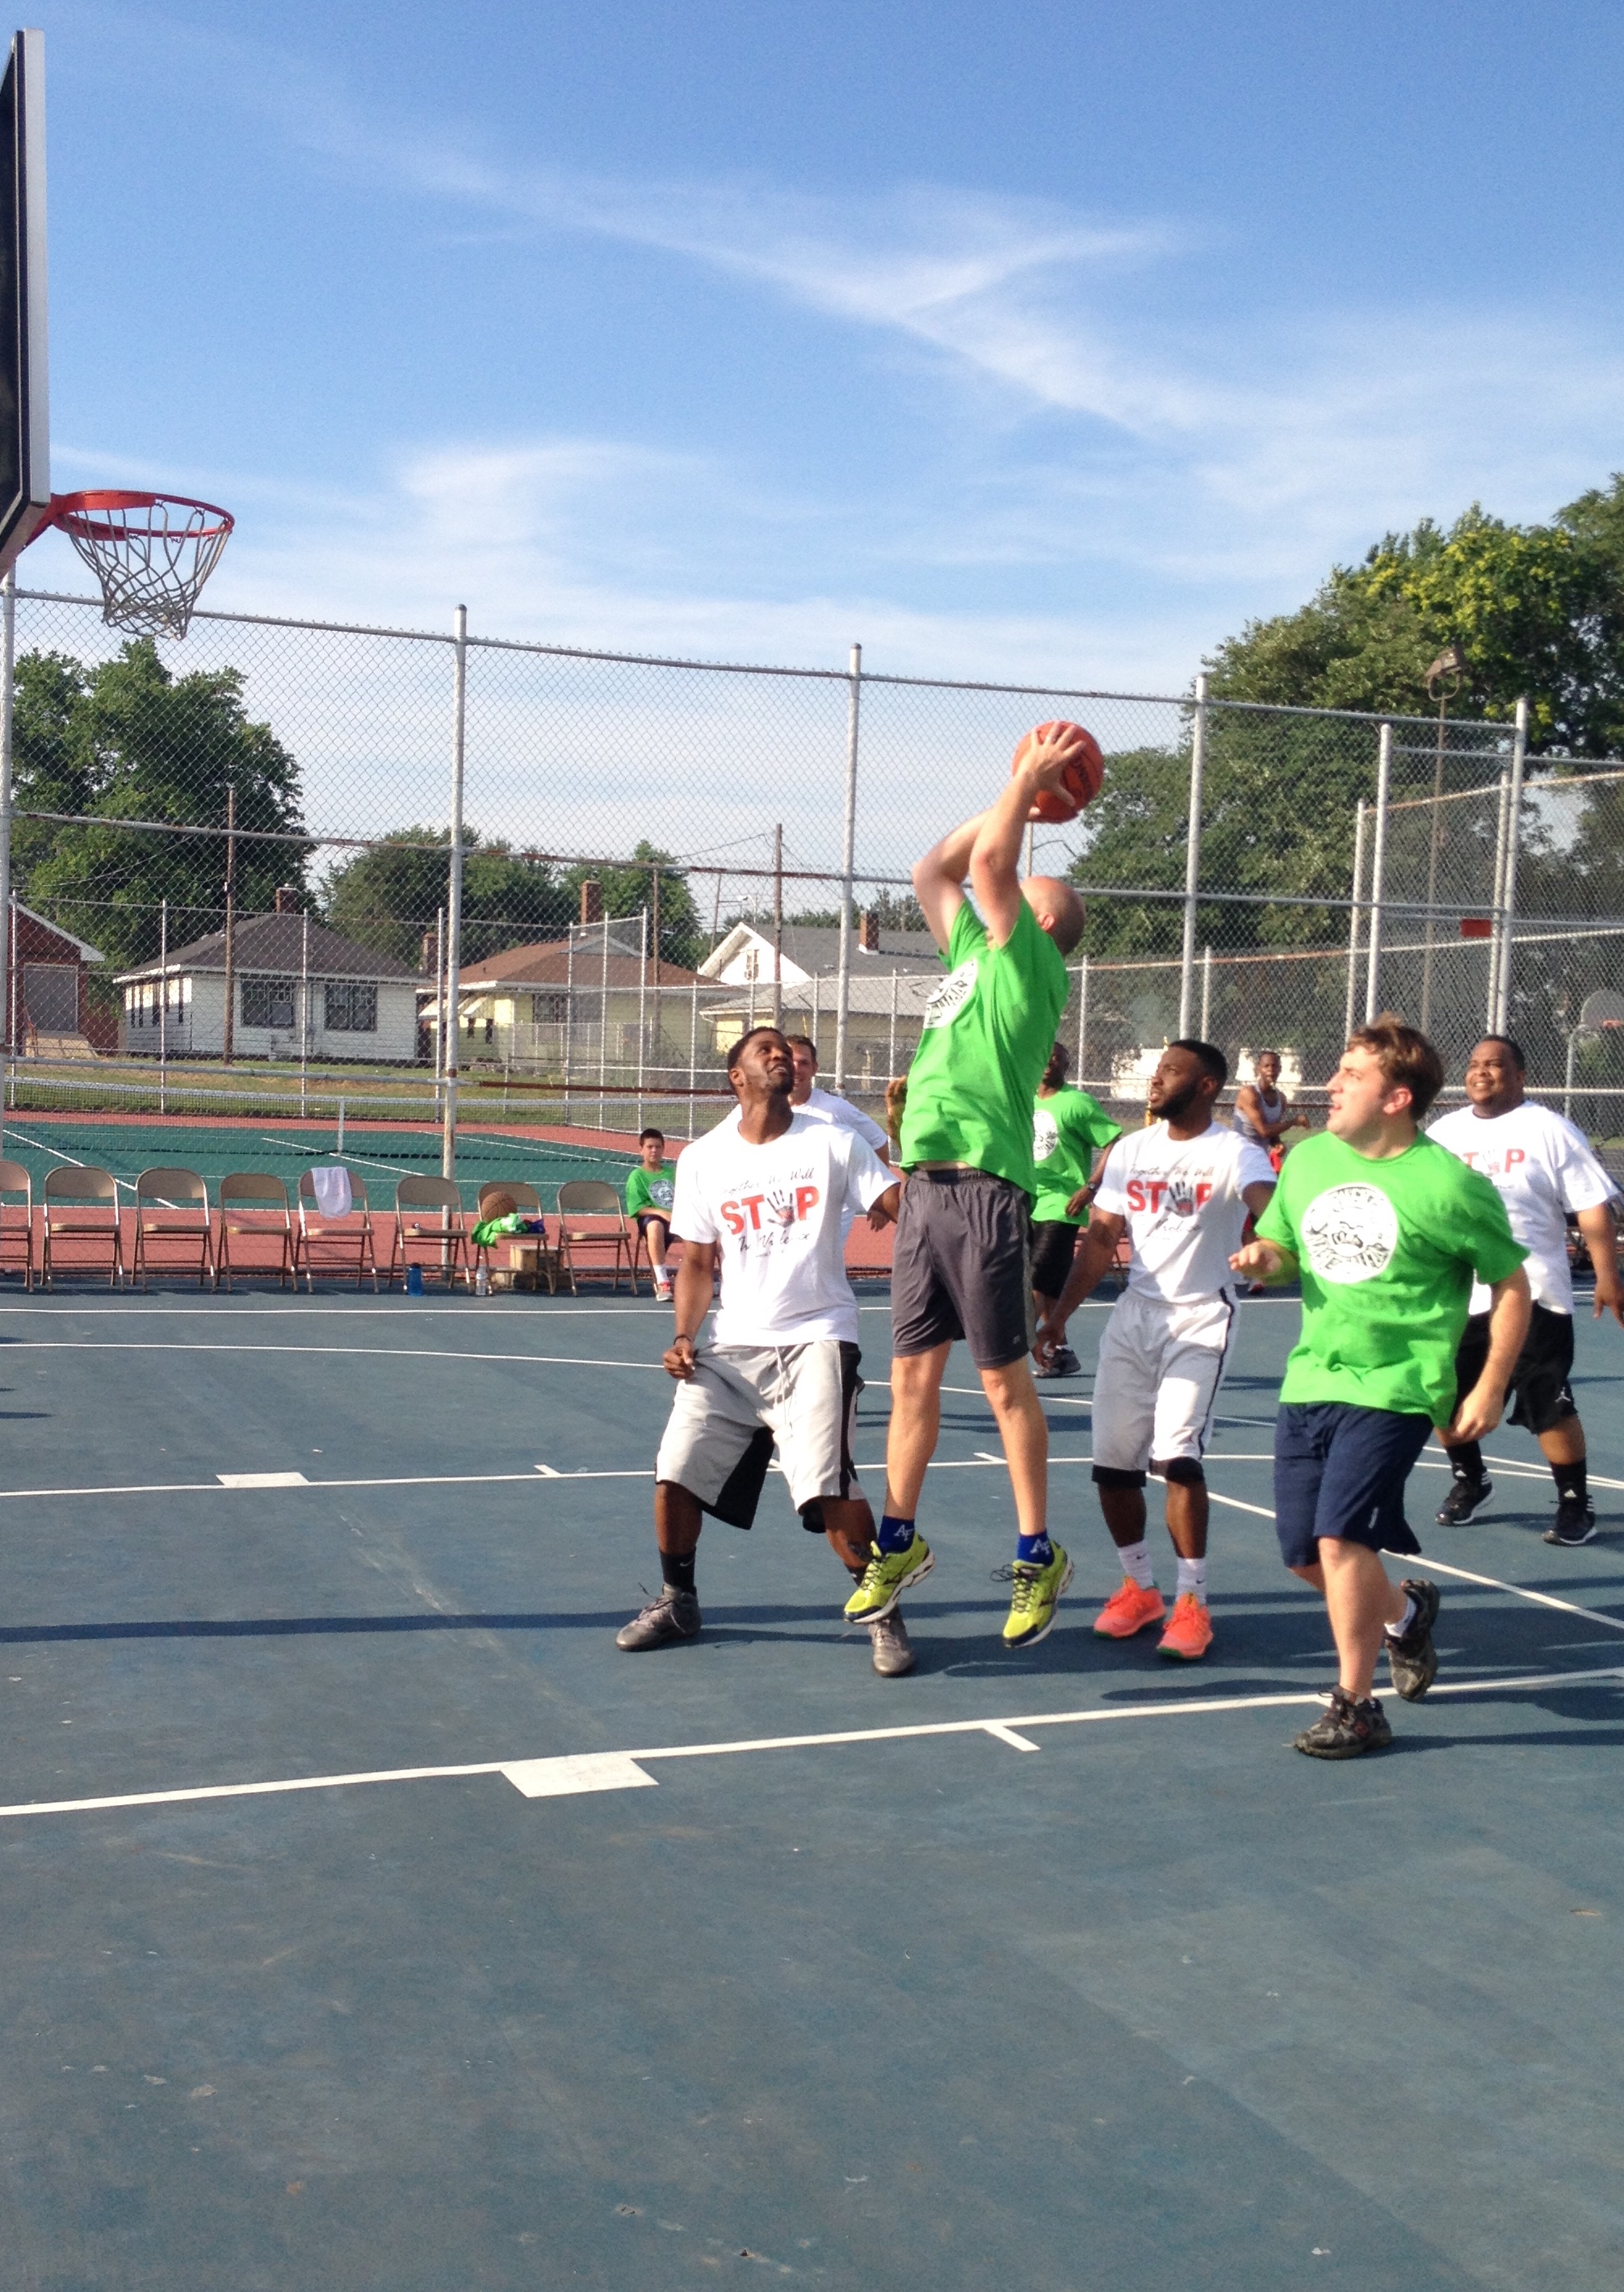 Photos are Evansville Officers and Prosecutor joining the community dust bowl Basket Ball 